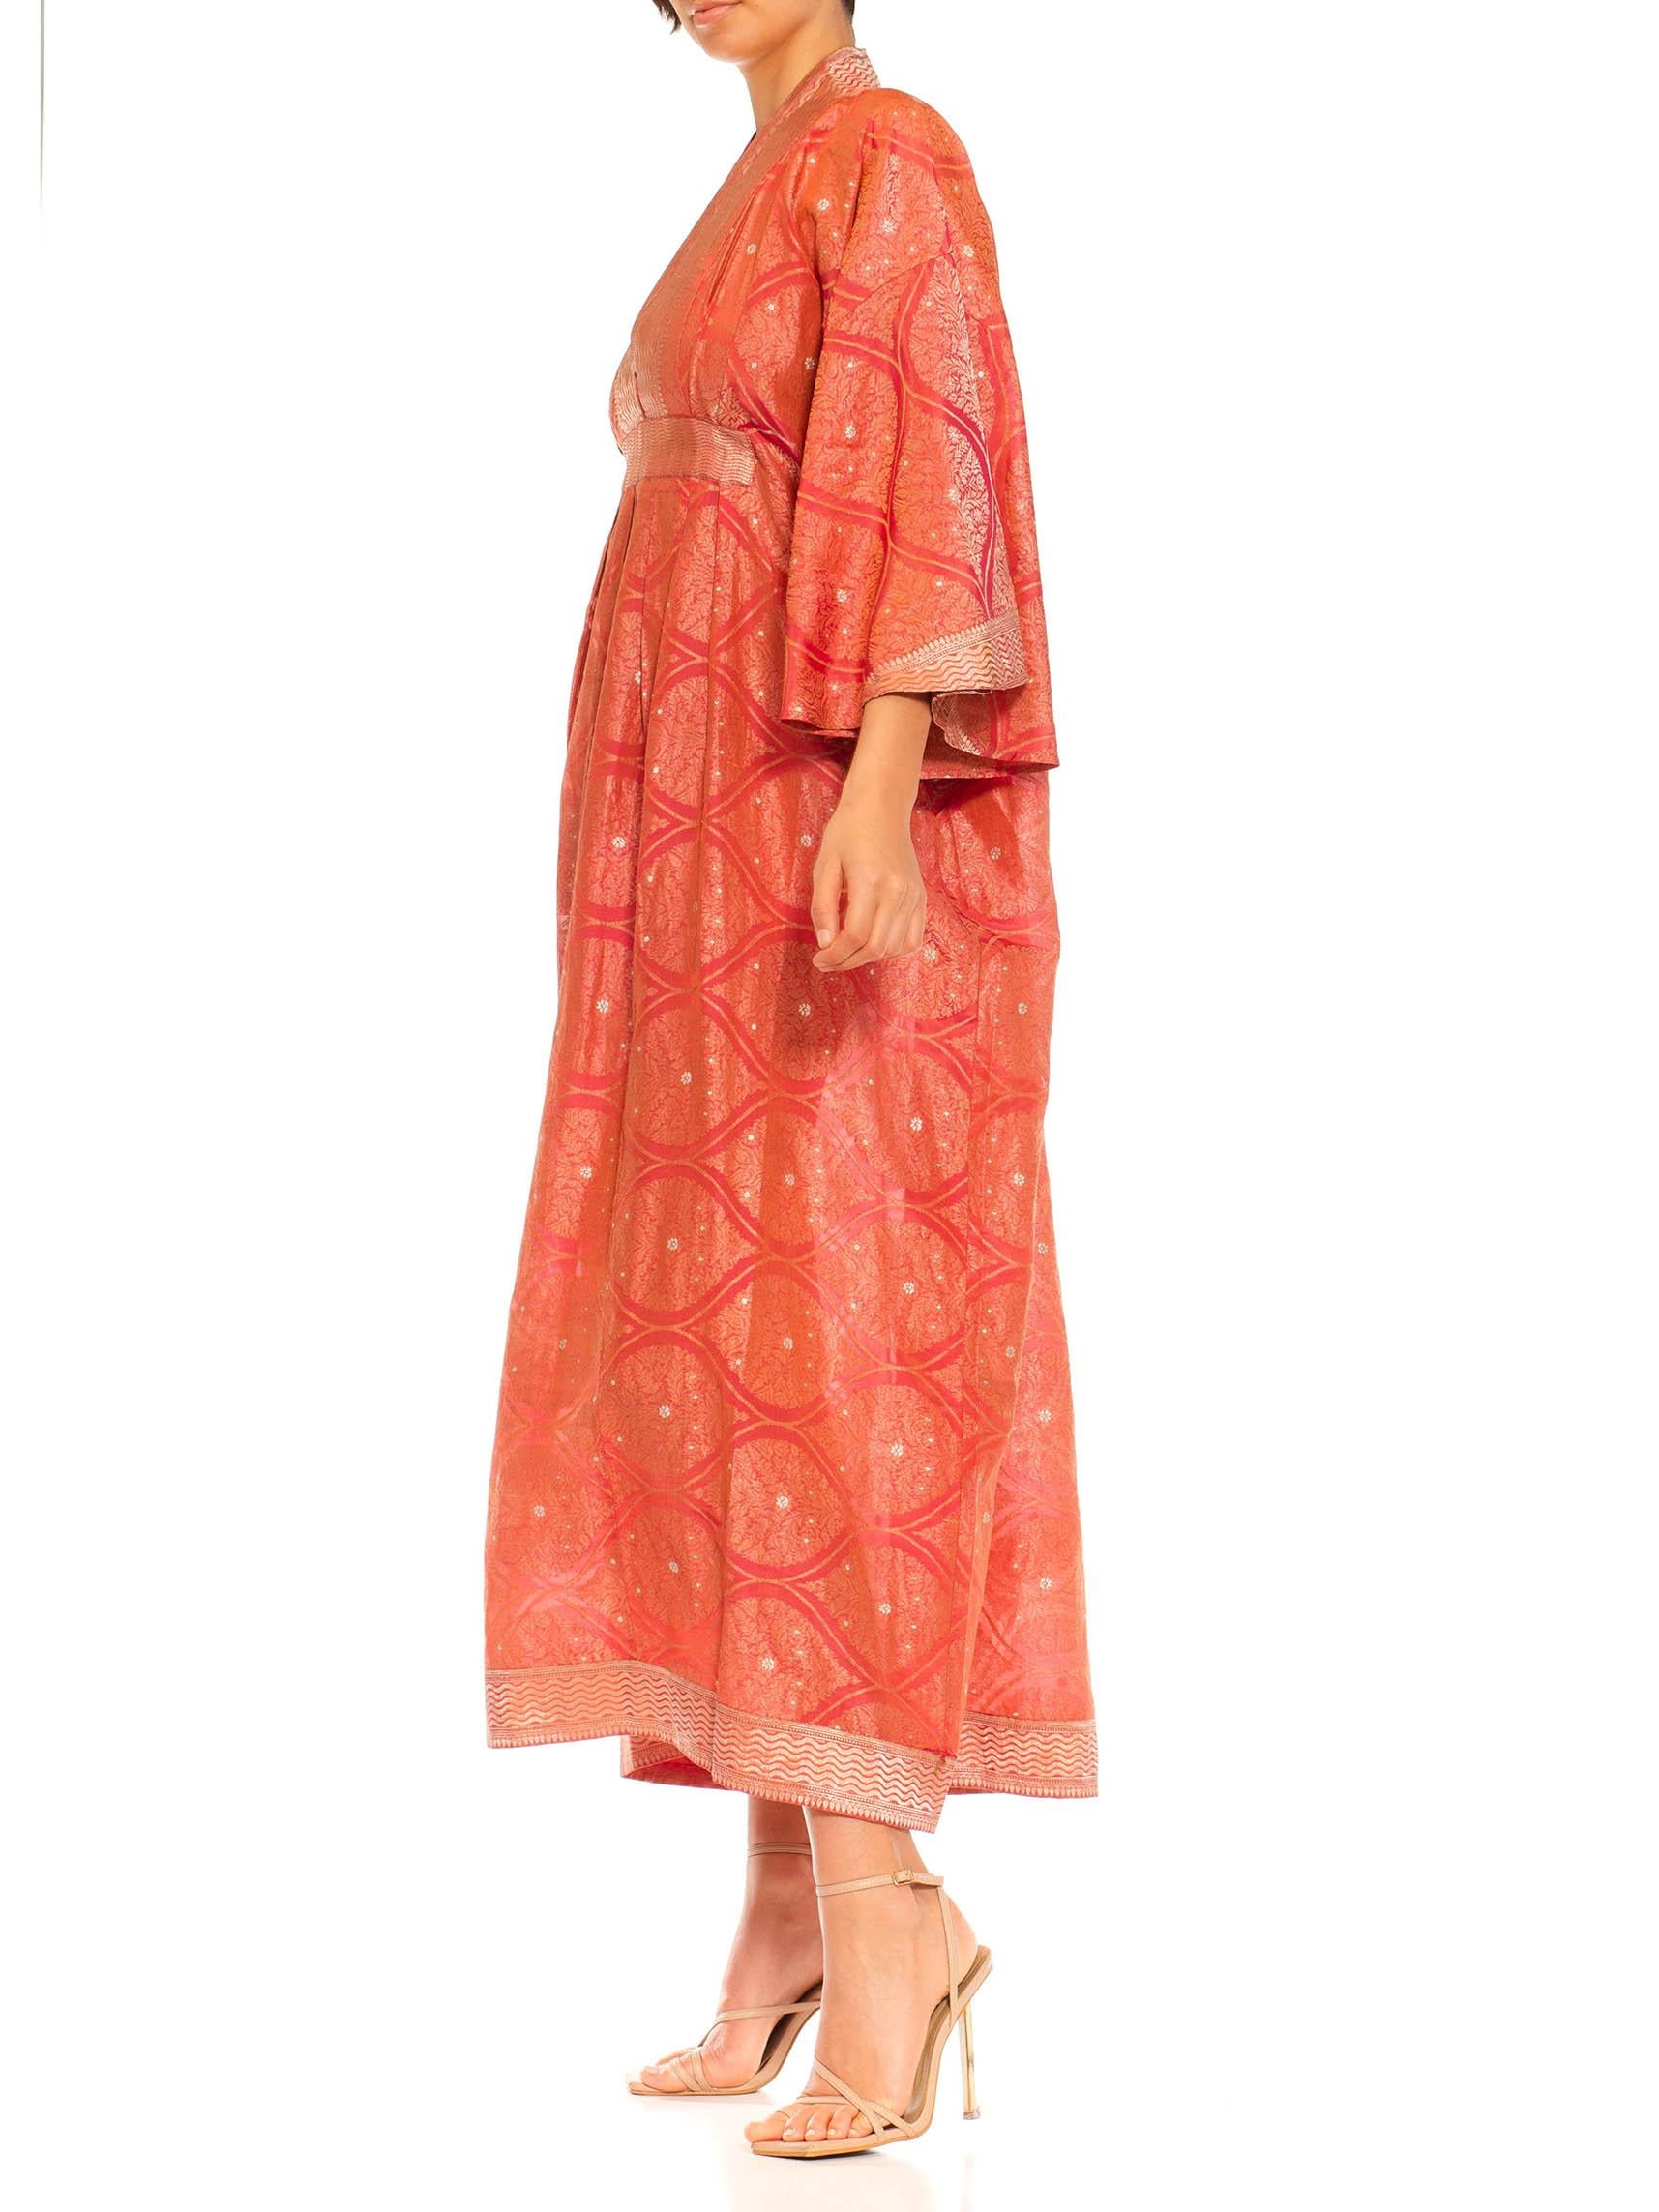 Morphew Collection Pink & Peach Metallic Gold Silk Geometric Kaftan Made From Vintage Saris
MORPHEW COLLECTION is made entirely by hand in our NYC Ateliér of rare antique materials sourced from around the globe. Our sustainable vintage materials